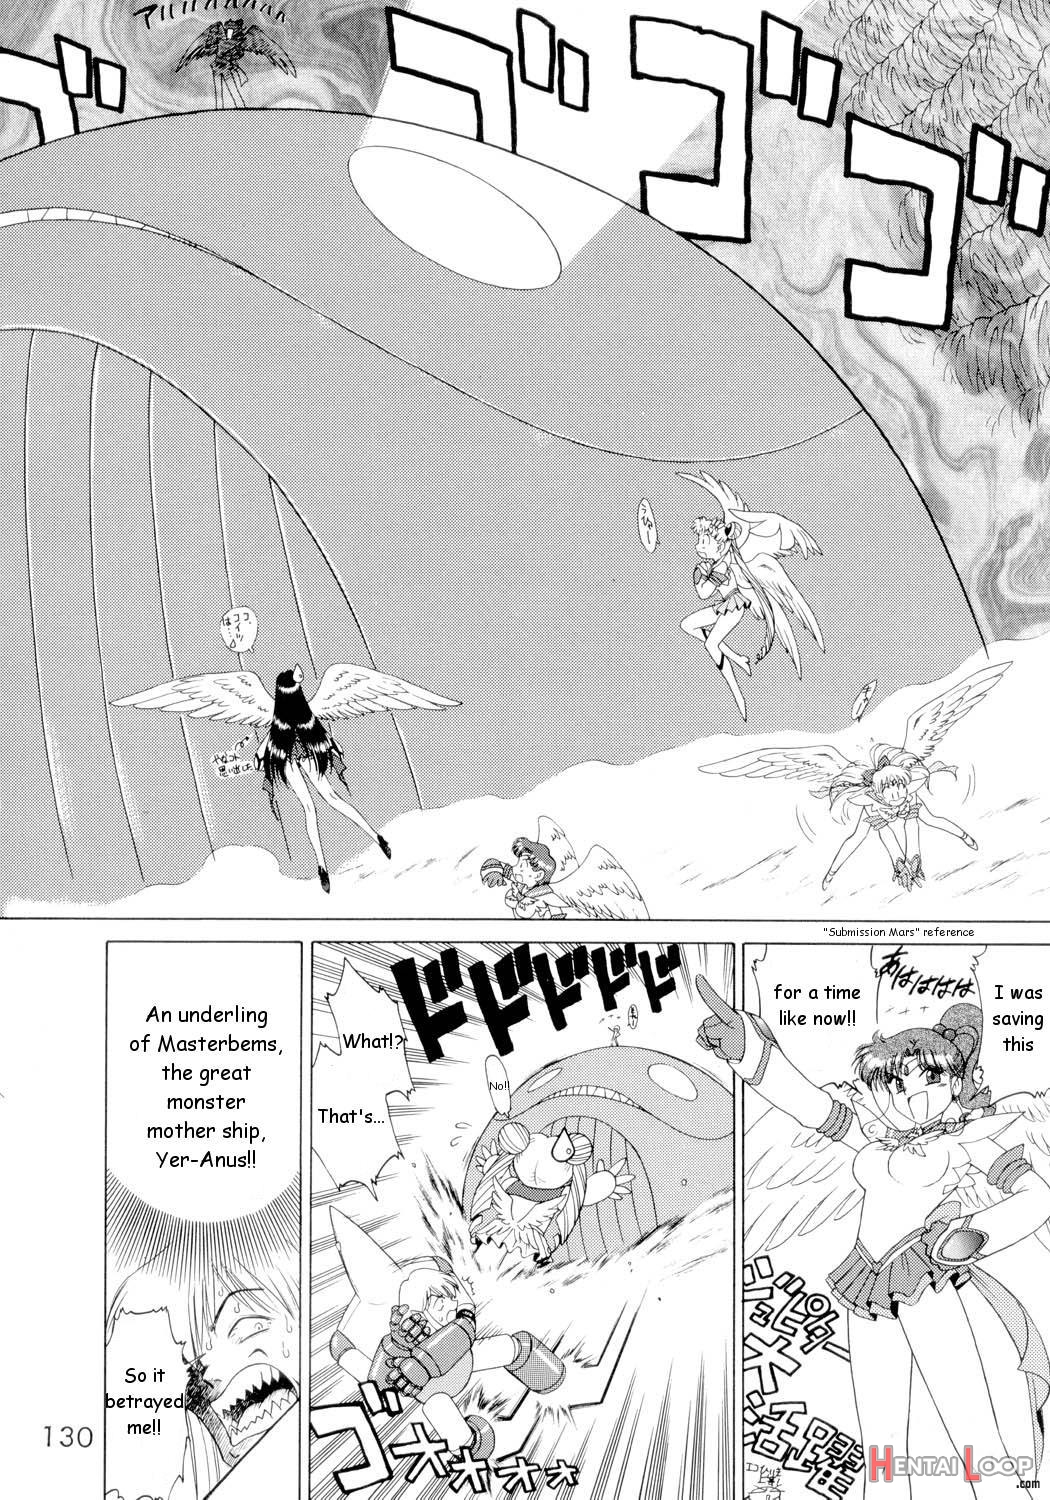 Submission Sailorstars page 129